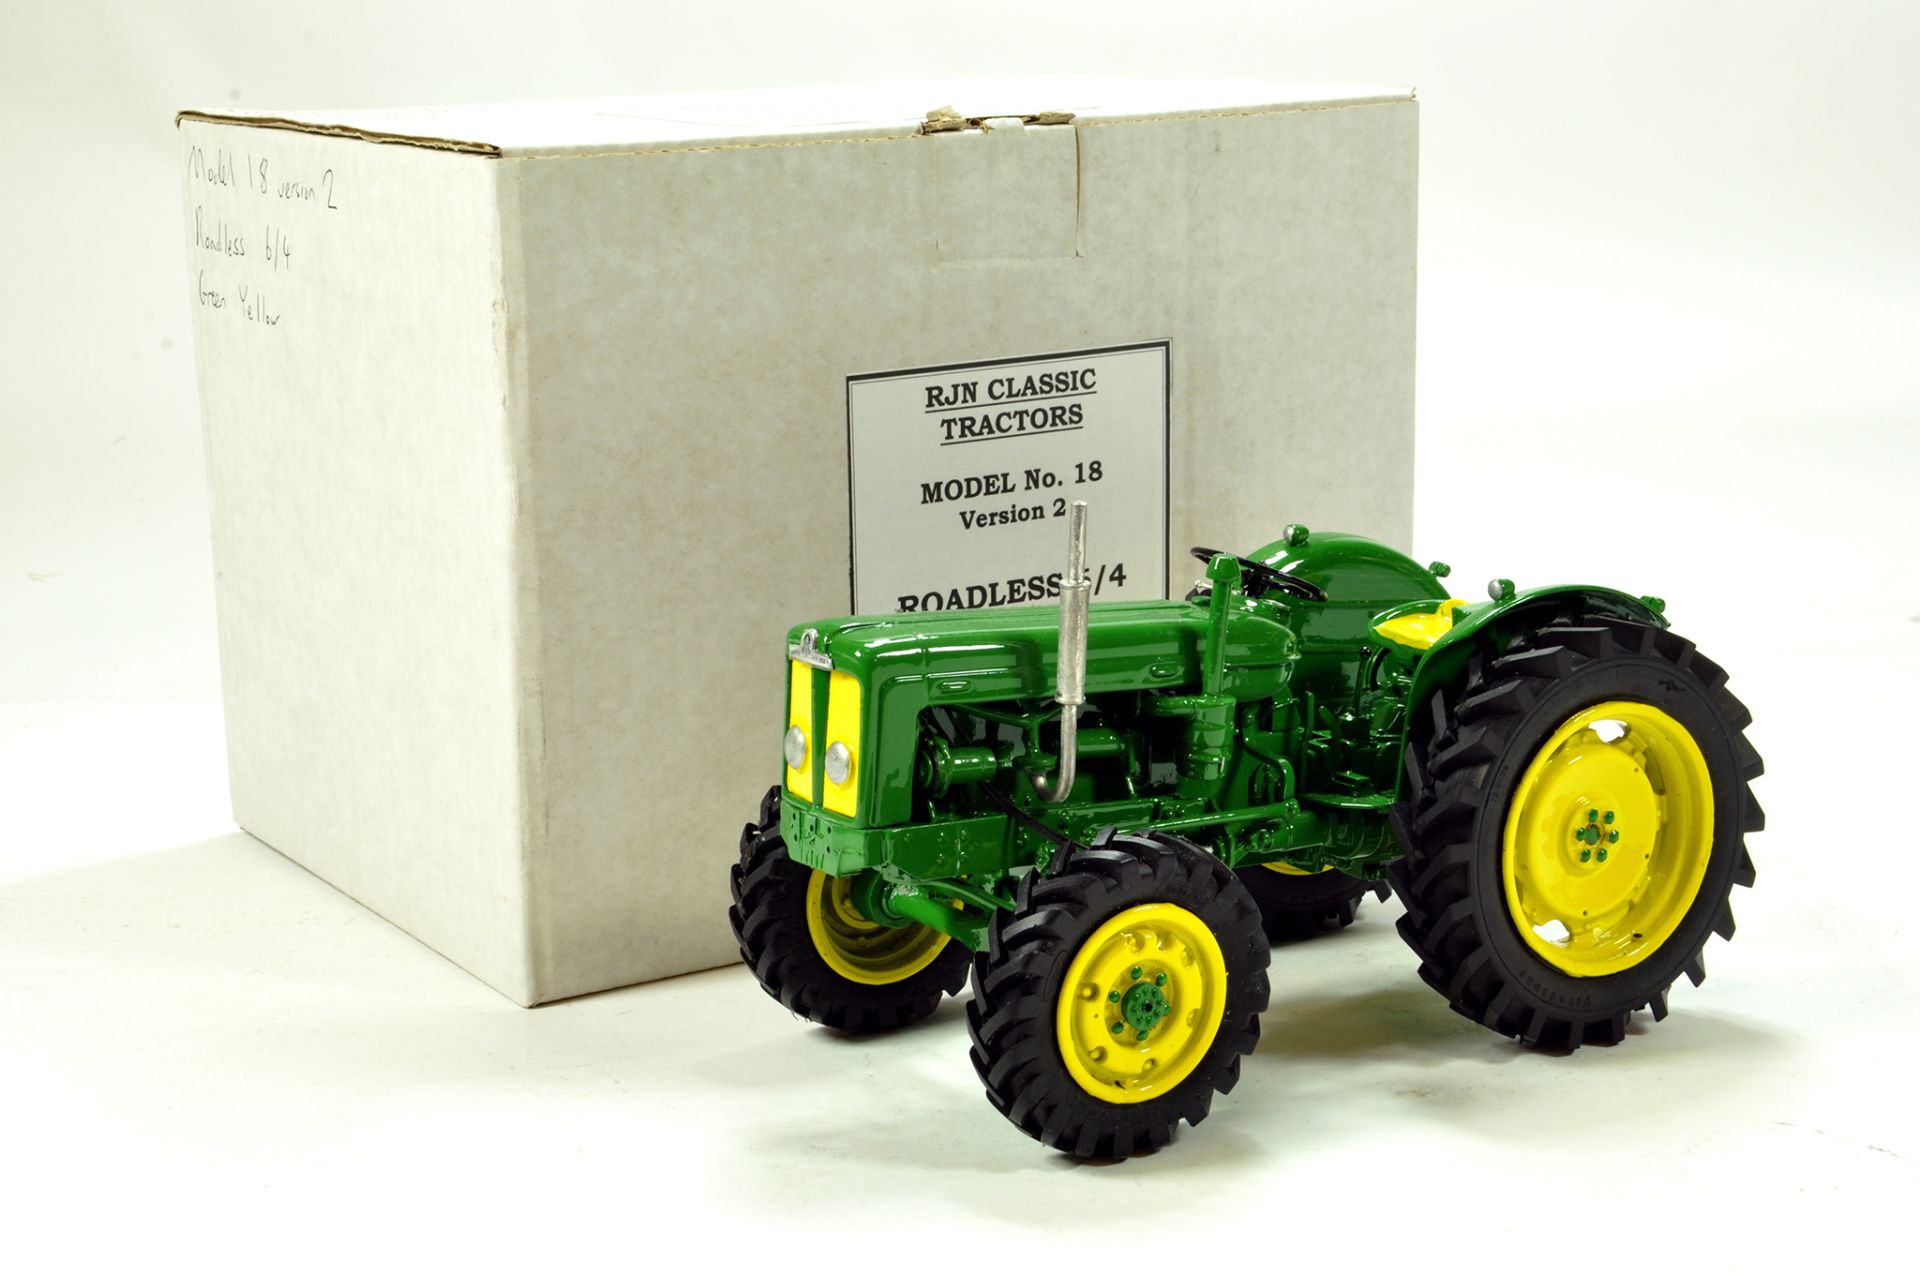 RJN Classic Tractors 1/16 Roadless 6/4 Tractor in Green and Yellow. Exclusive Limited Edition Hand